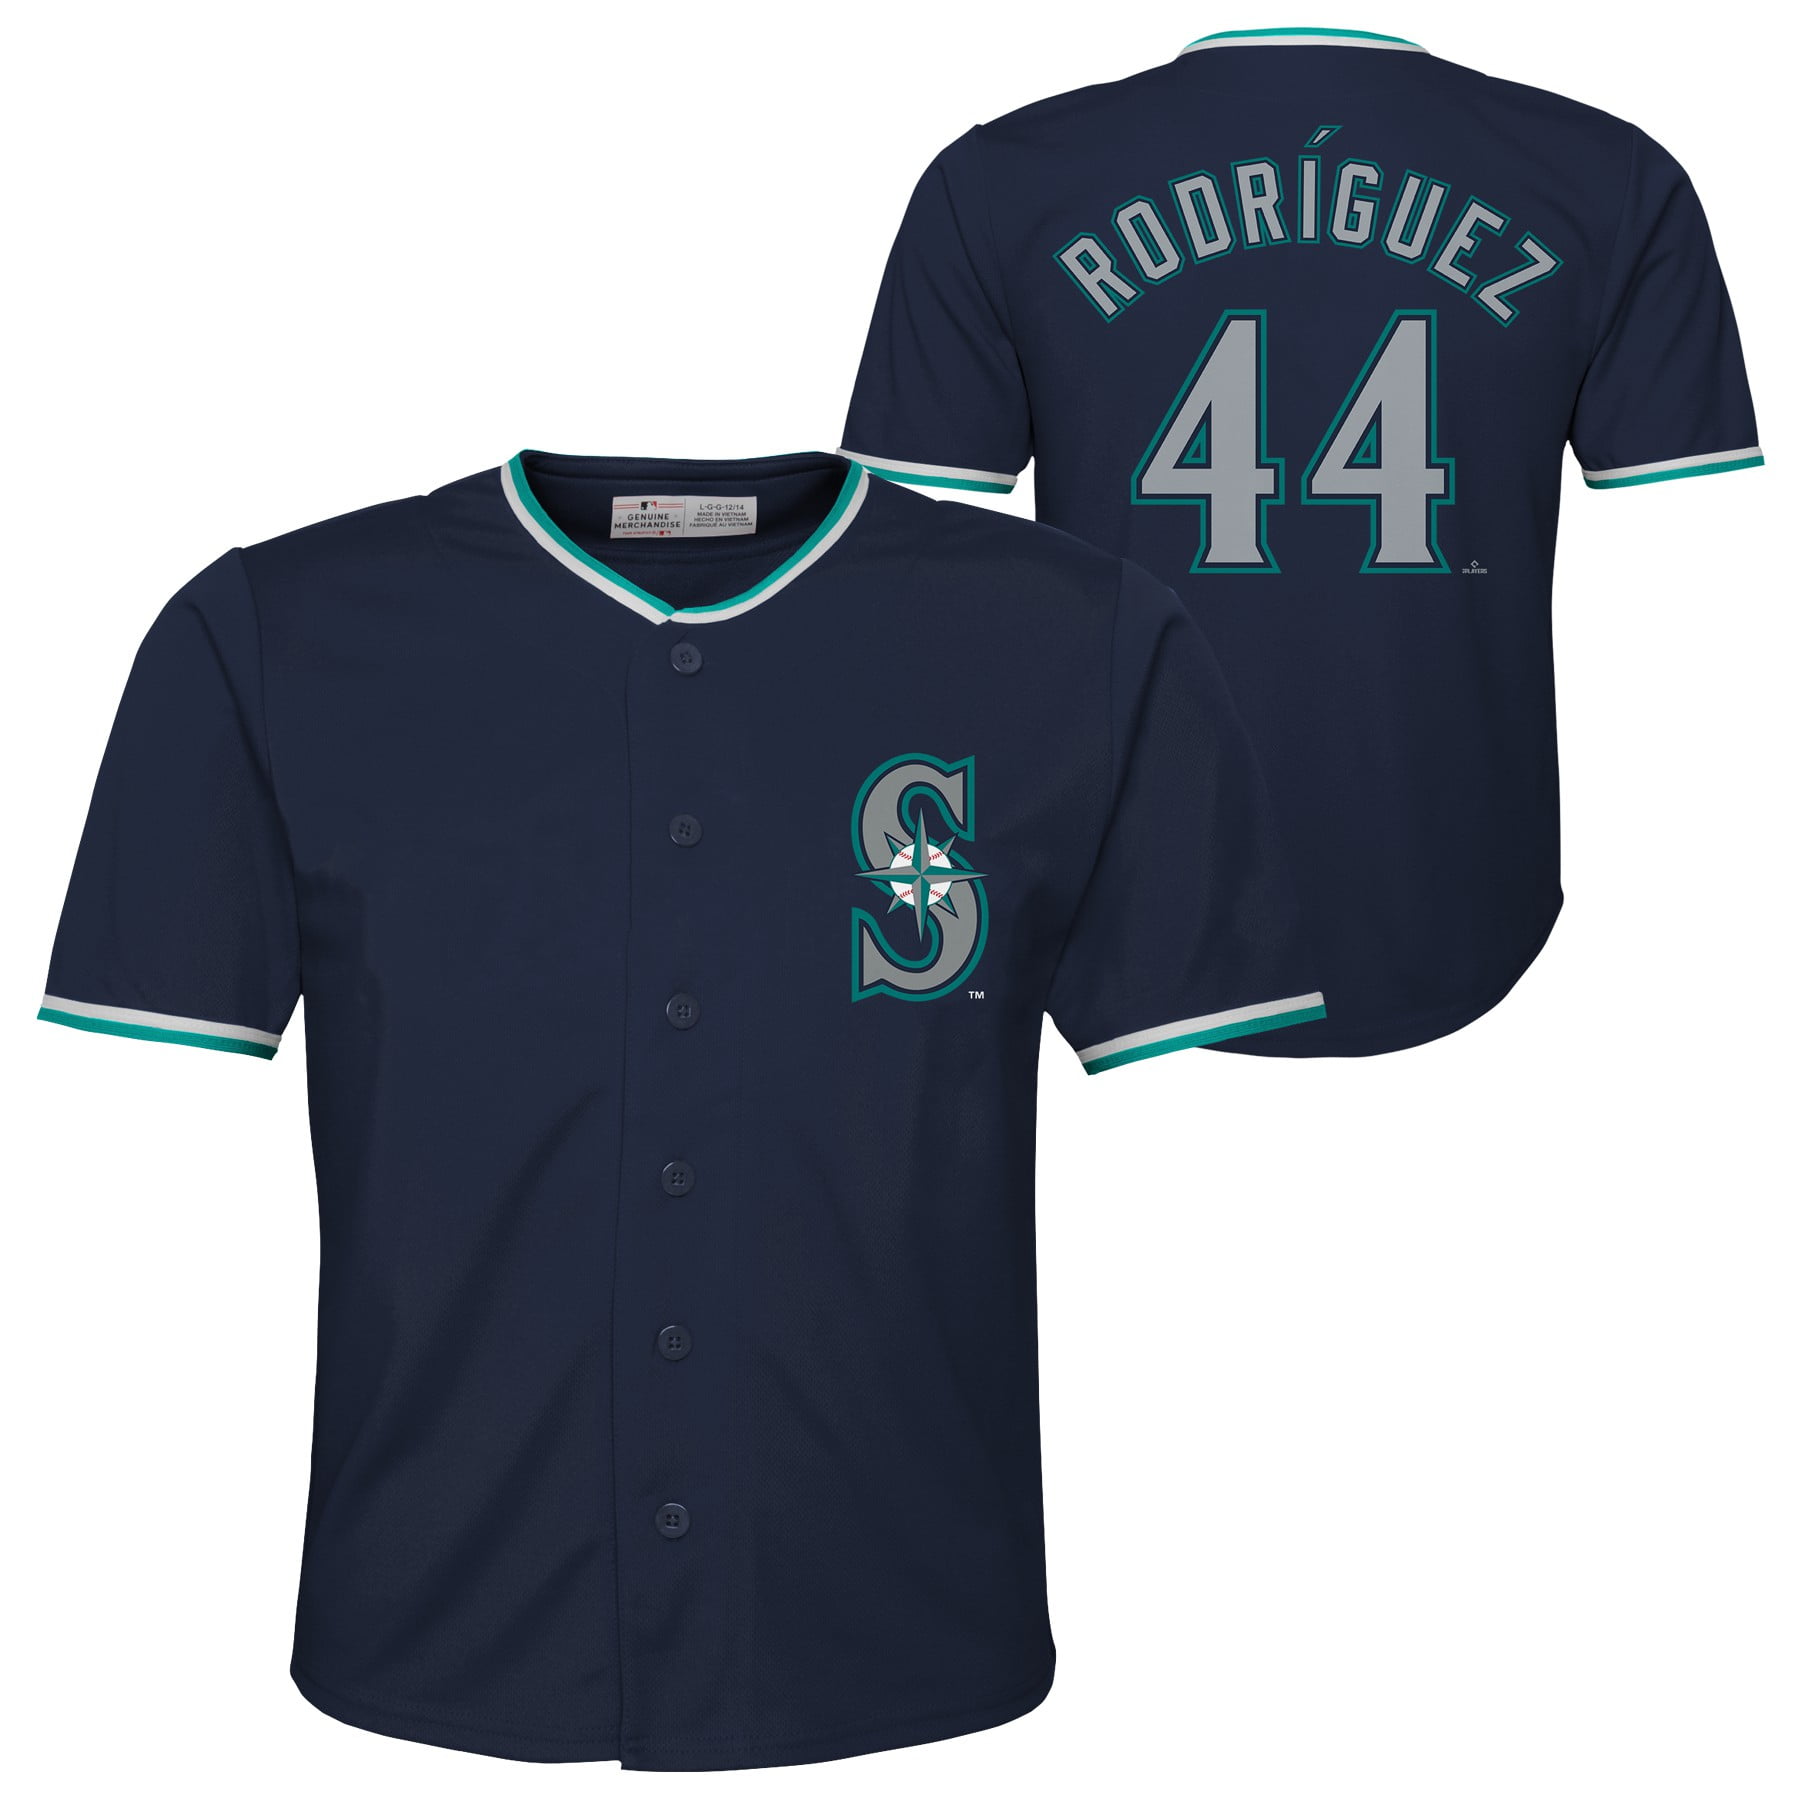 seattle mariners jersey and julio rodriguez youth size